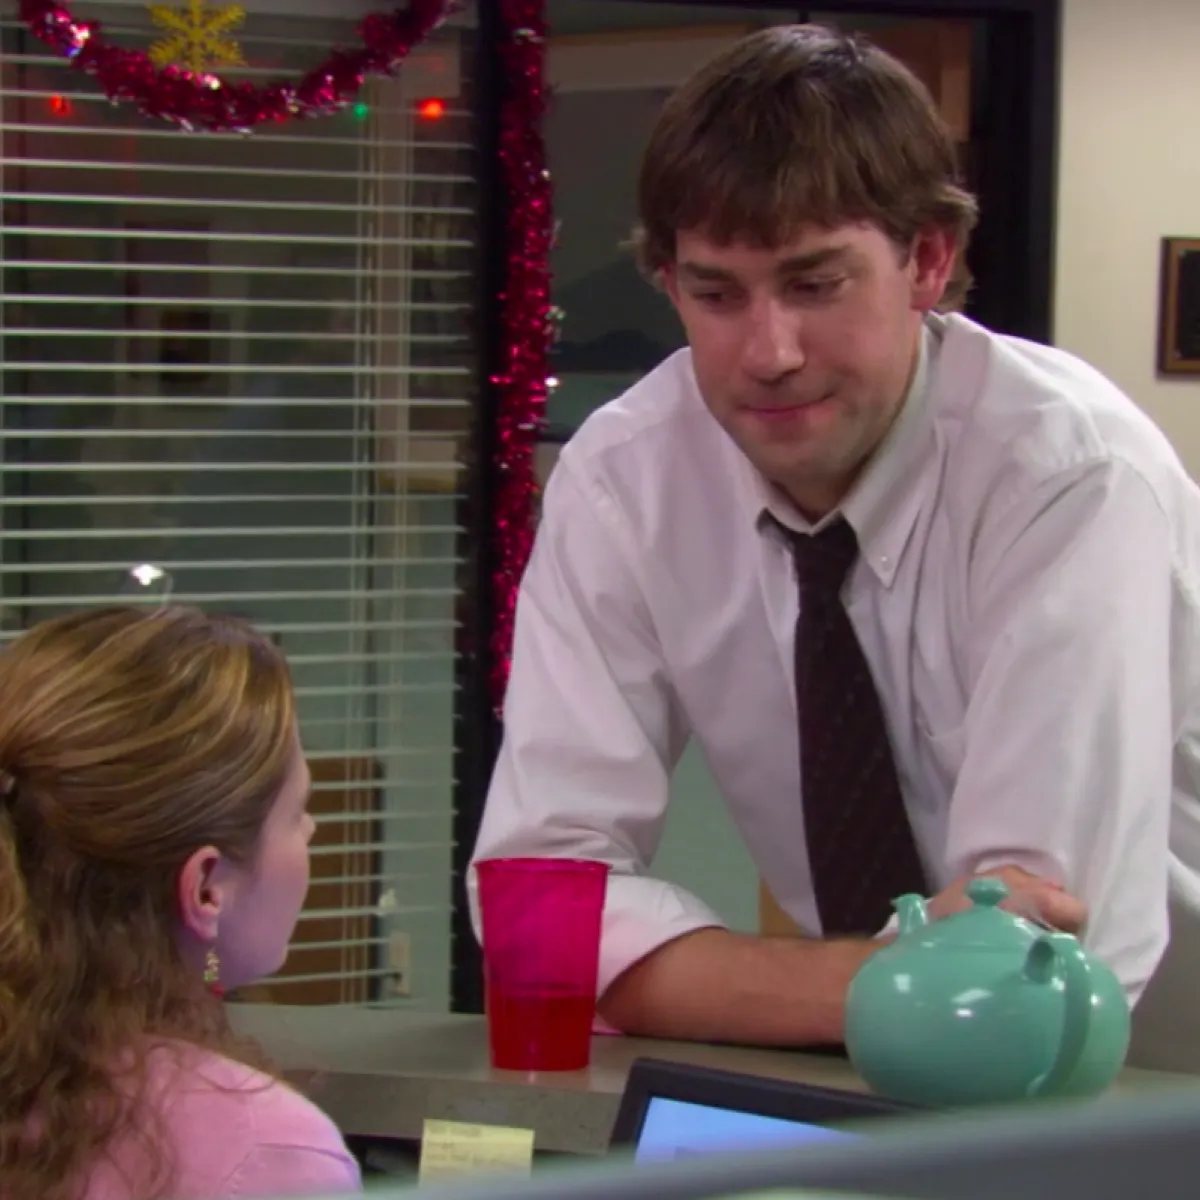 Jim talking to Pam at her desk